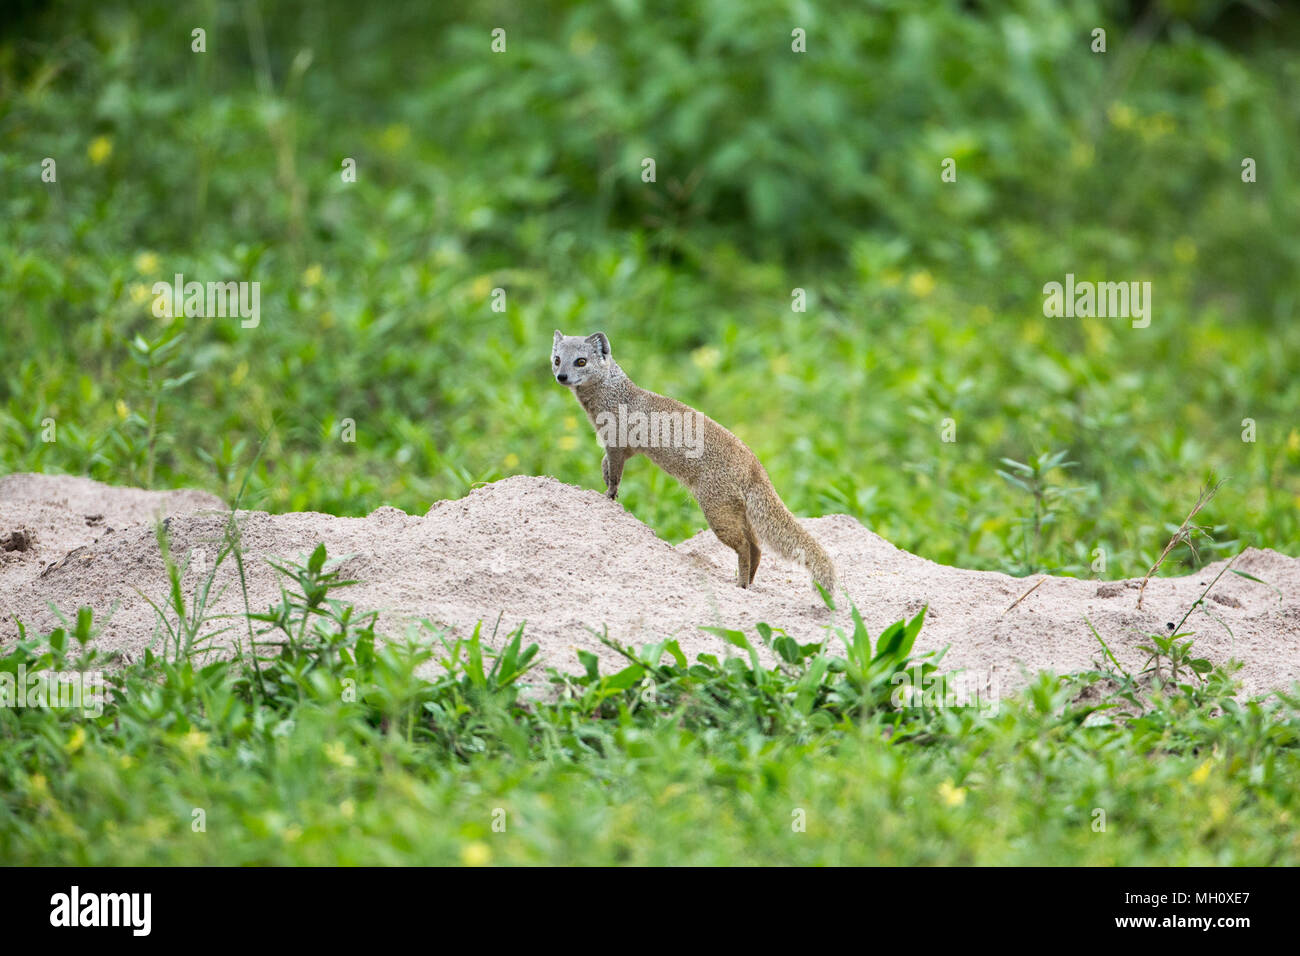 Yellow Mongoose, Red or Bushy-tailed Meekat, (Cynictus penicillata). Living in pairs and family groups, often forages alone. Okavango Delta, Botswana. Stock Photo